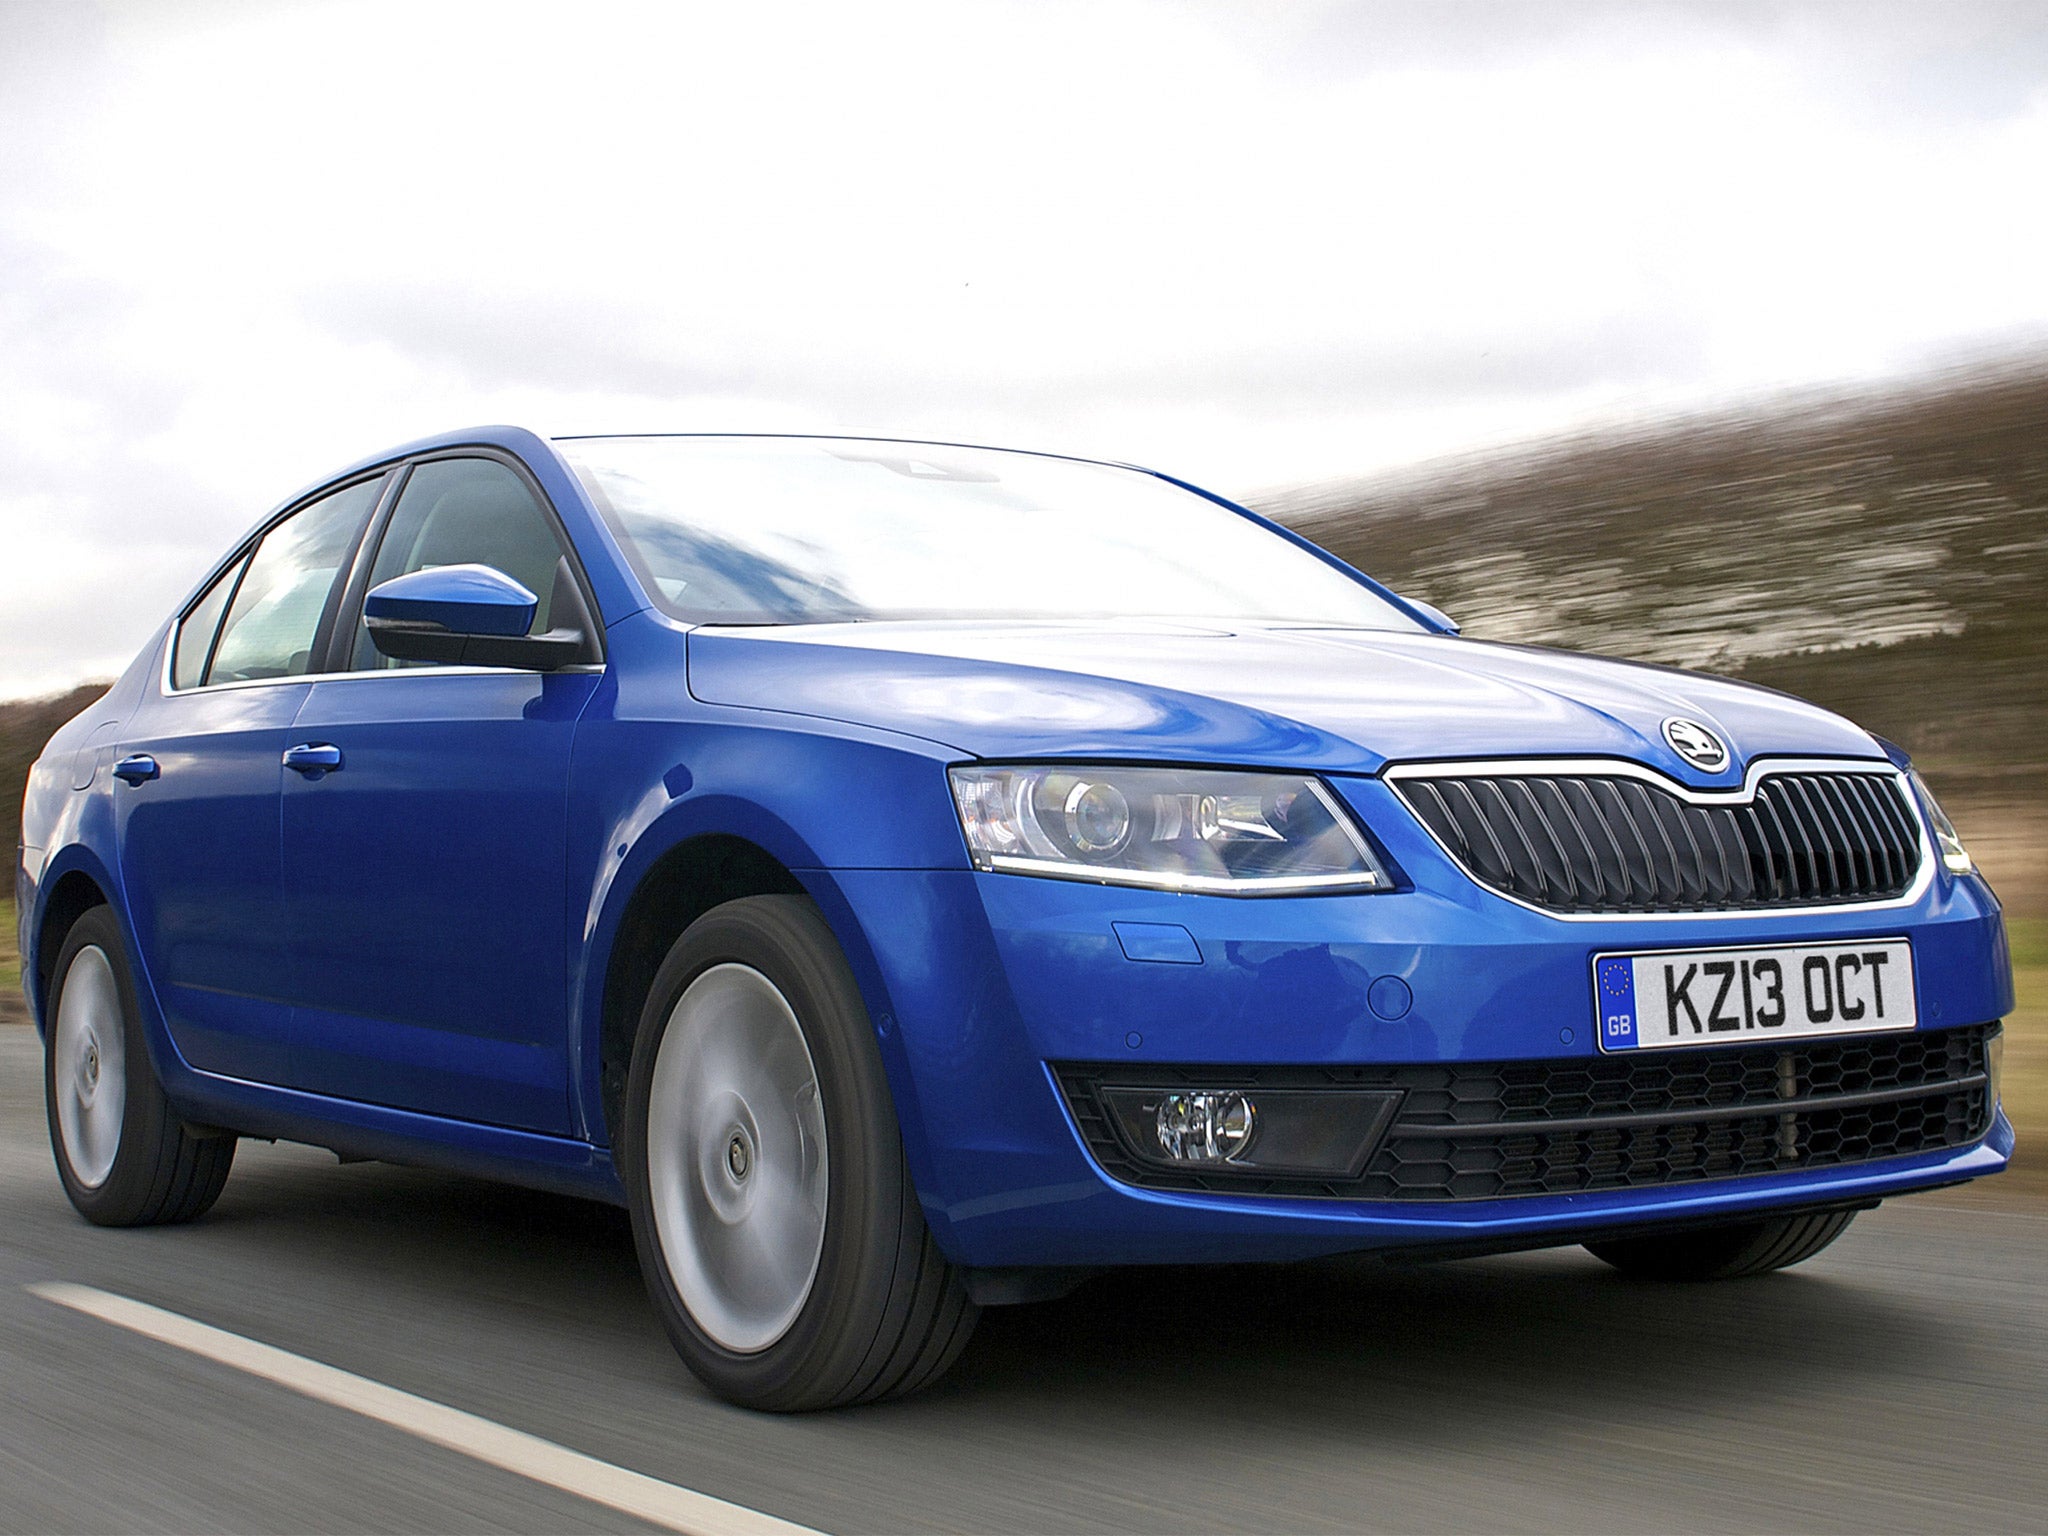 Without compromise: the new Skoda Octavia